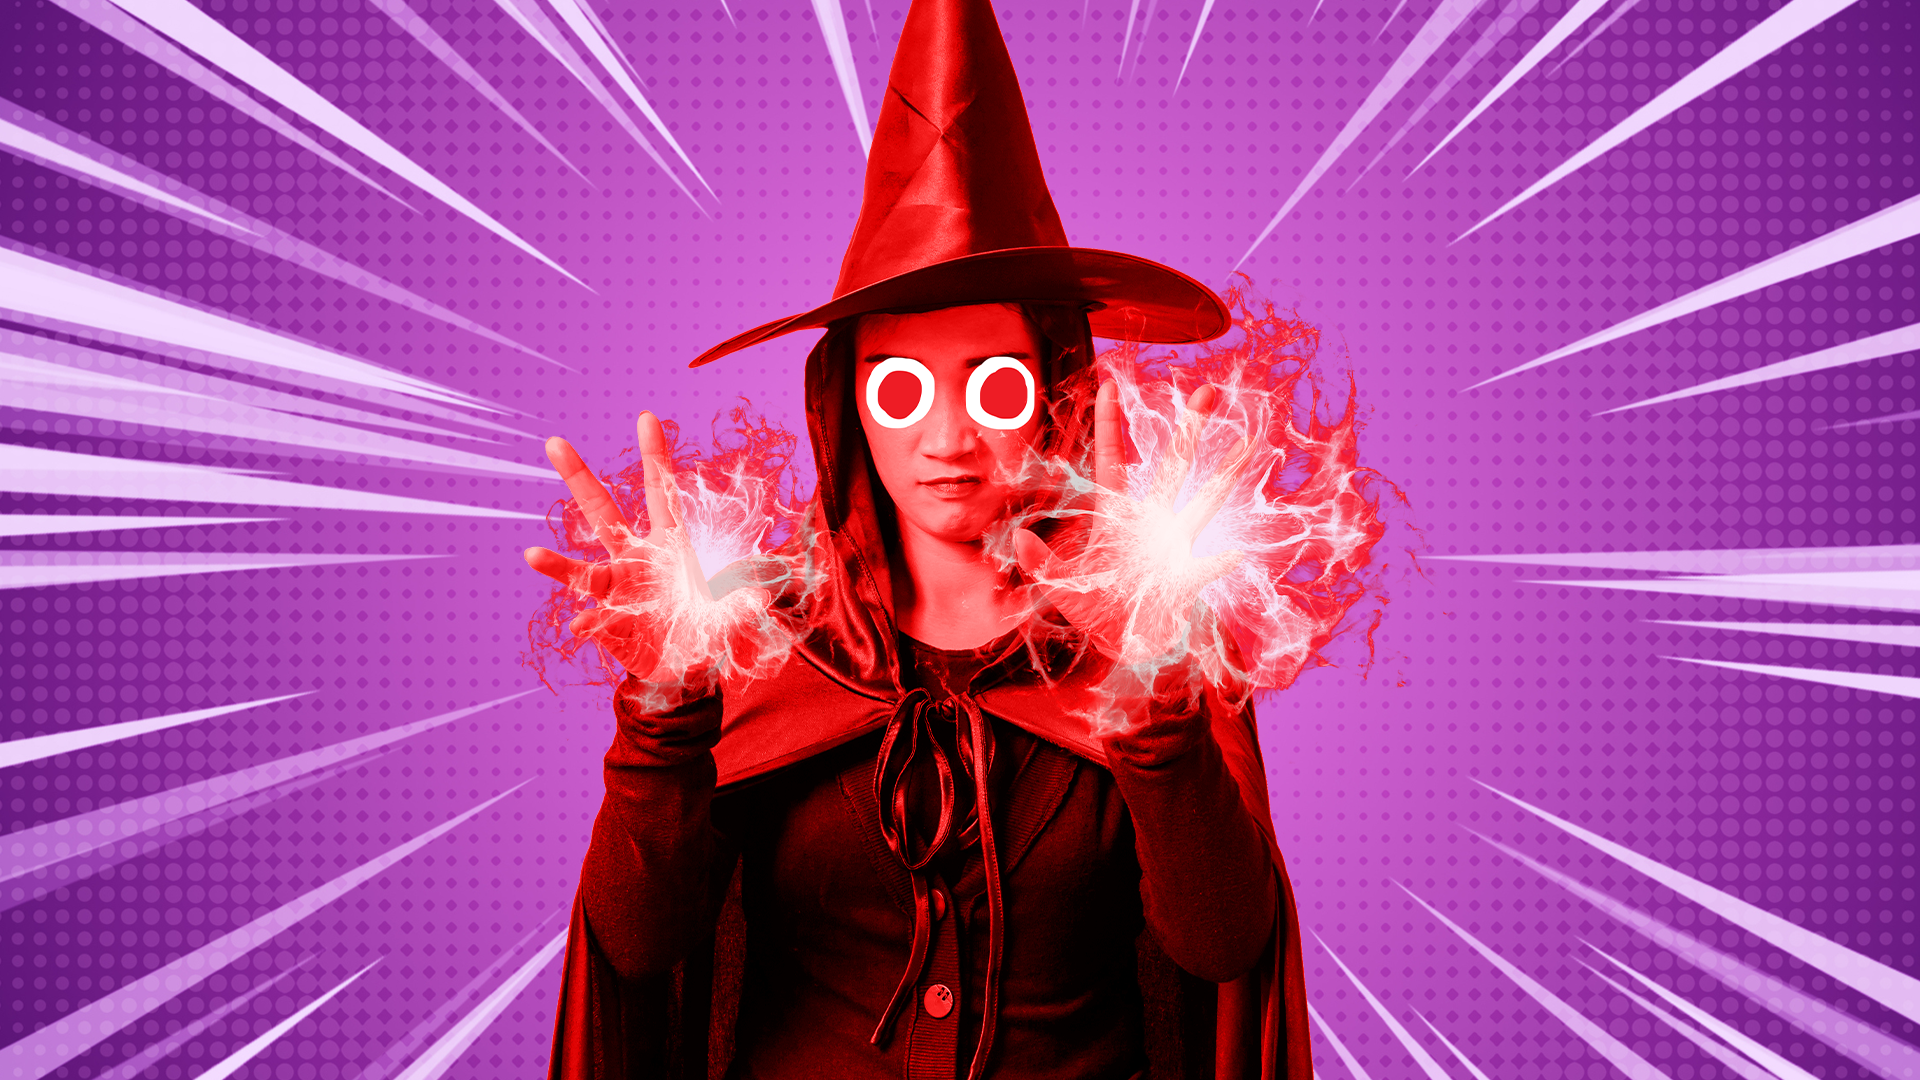 Witch with fireballs coming out of her hands